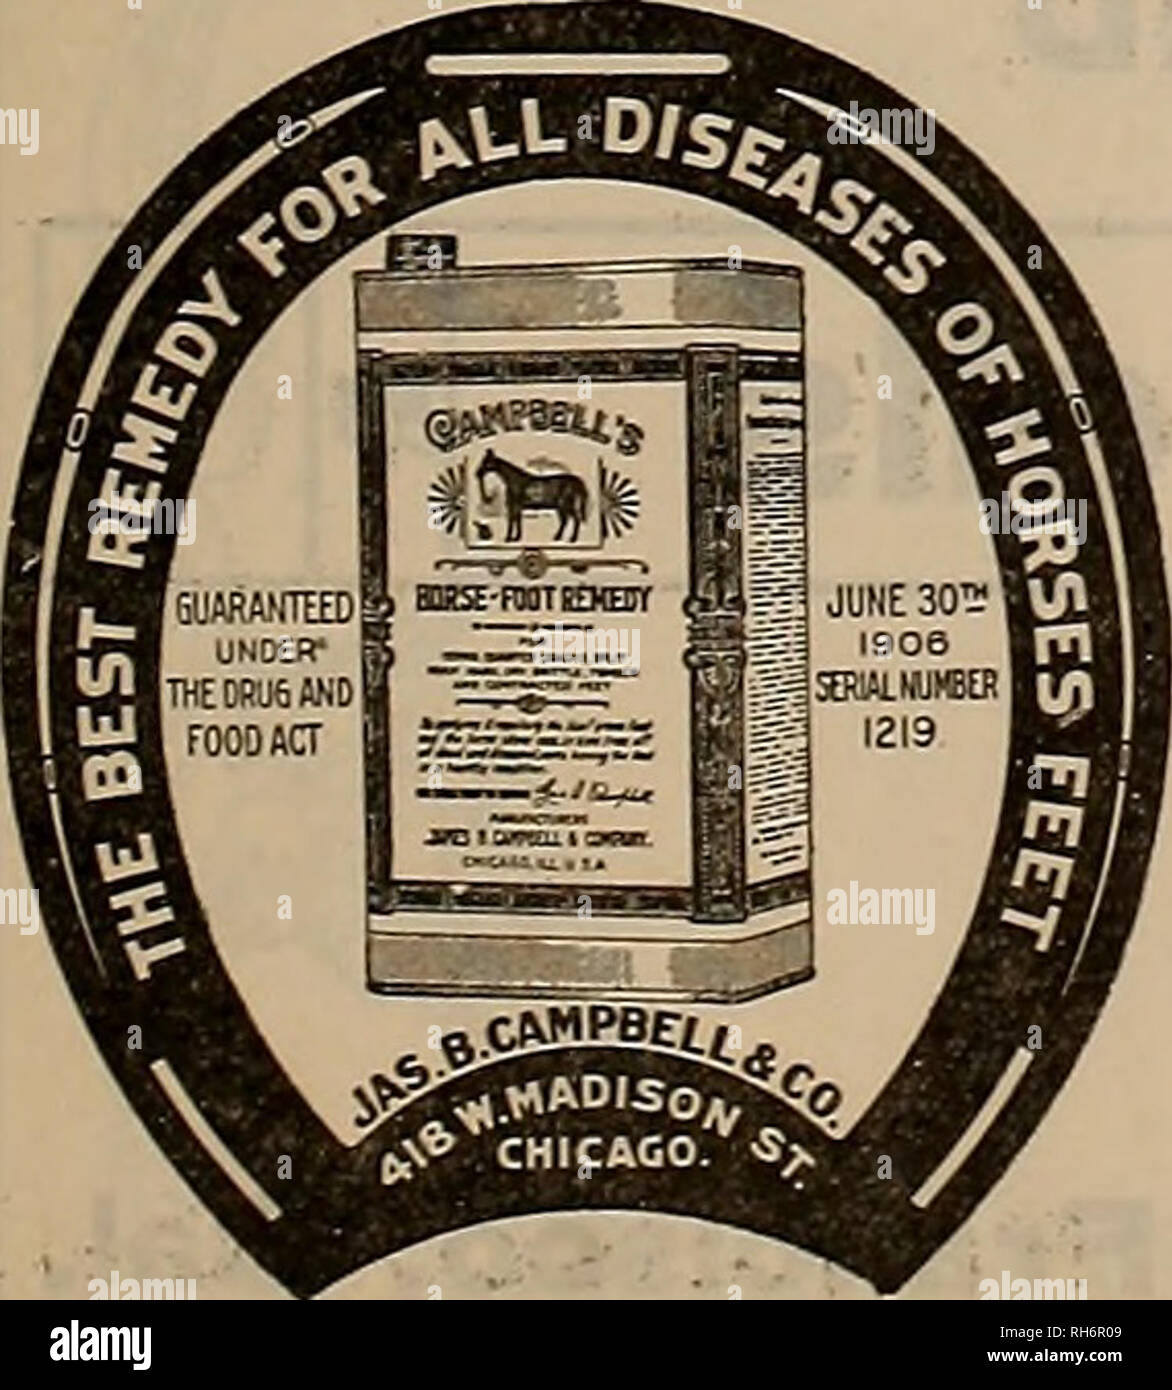 . Breeder and sportsman. Horses. STUDEBAKER BROS. &amp; CO., of California, Market and 10th Sts., San Francisco 75 PER CENT OF ALL HORSE OWNERS AND TRAINERS USE AND RECOMMEND CAMPBELL'S HORSE FOOT REMEDY -SOLD BY—. W. A. Sayre Sacramento, Cal. R. T. Frasier Pueblo, Colo. J. G. Read A Bro Ogden, Utah Jubinville &amp; Xance Batte, Mont. A. A. Kraft Co Spokane, Wash. Thos, 31. Henderson Seattle, Wash. C. Rodder Stockton, Cal. Wm. E. Detels Pleasnnton, Cal. W. C. Topping San Diego, Cal. Main-Winchester-Jepsen Co Los Angeles, Cal. li. Tliornwaldson Fresno, Cal. Jno. McKcrron San' Francisco, Cal. Jo Stock Photo